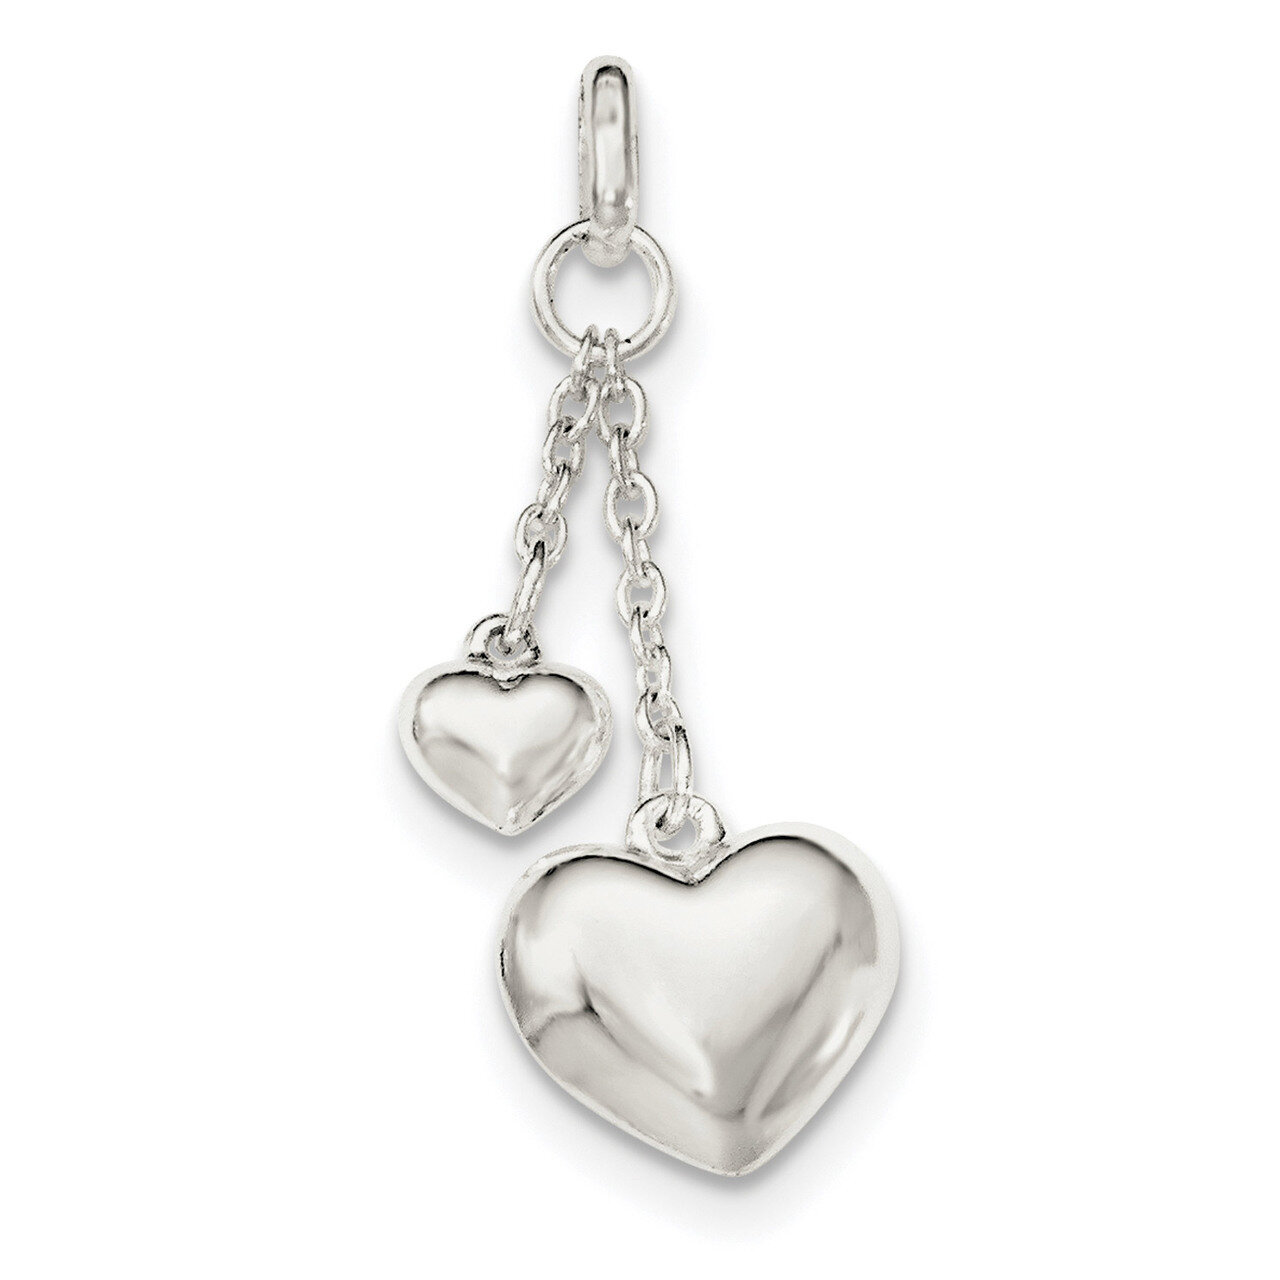 Puffed Heart Pendant Sterling Silver Polished QC8461